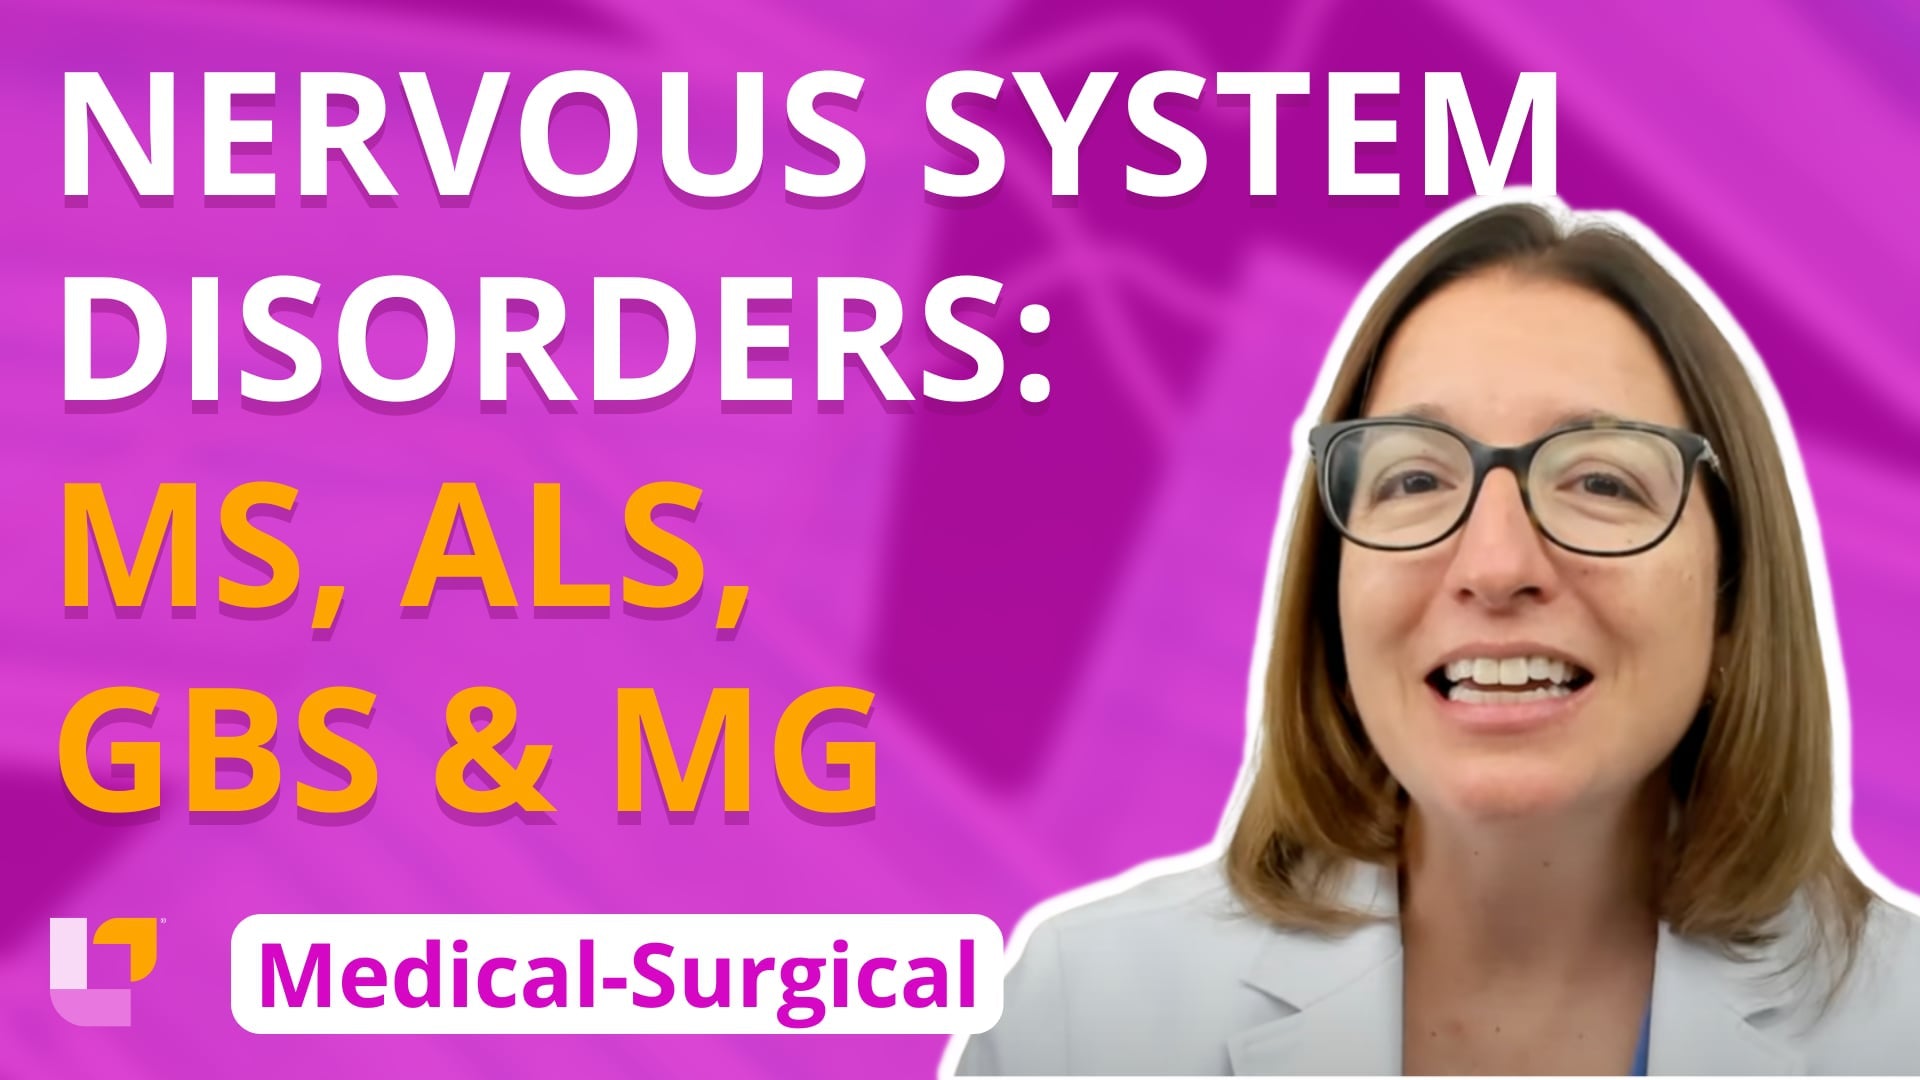 Med-Surg - Nervous System, part 11: Multiple Sclerosis, Amyotrophic Lateral Sclerosis, Guillain-Barre Syndrome, Myasthenia Gravis - LevelUpRN